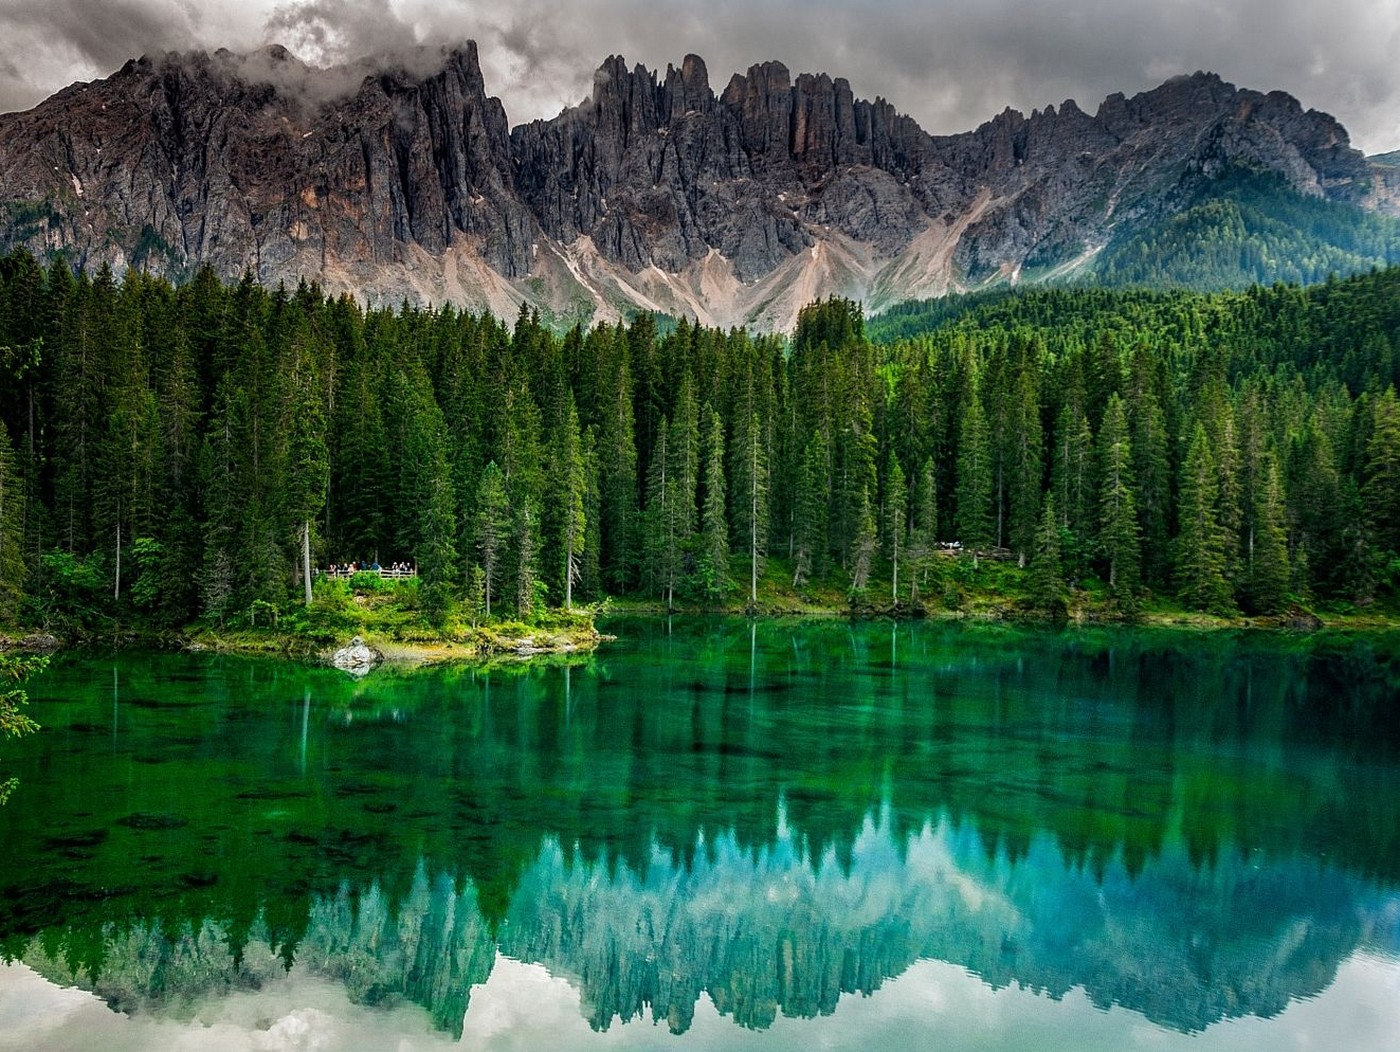 General 1400x1052 nature landscape photography lake calm waters reflection forest mountains trees emerald green summer Alps Italy